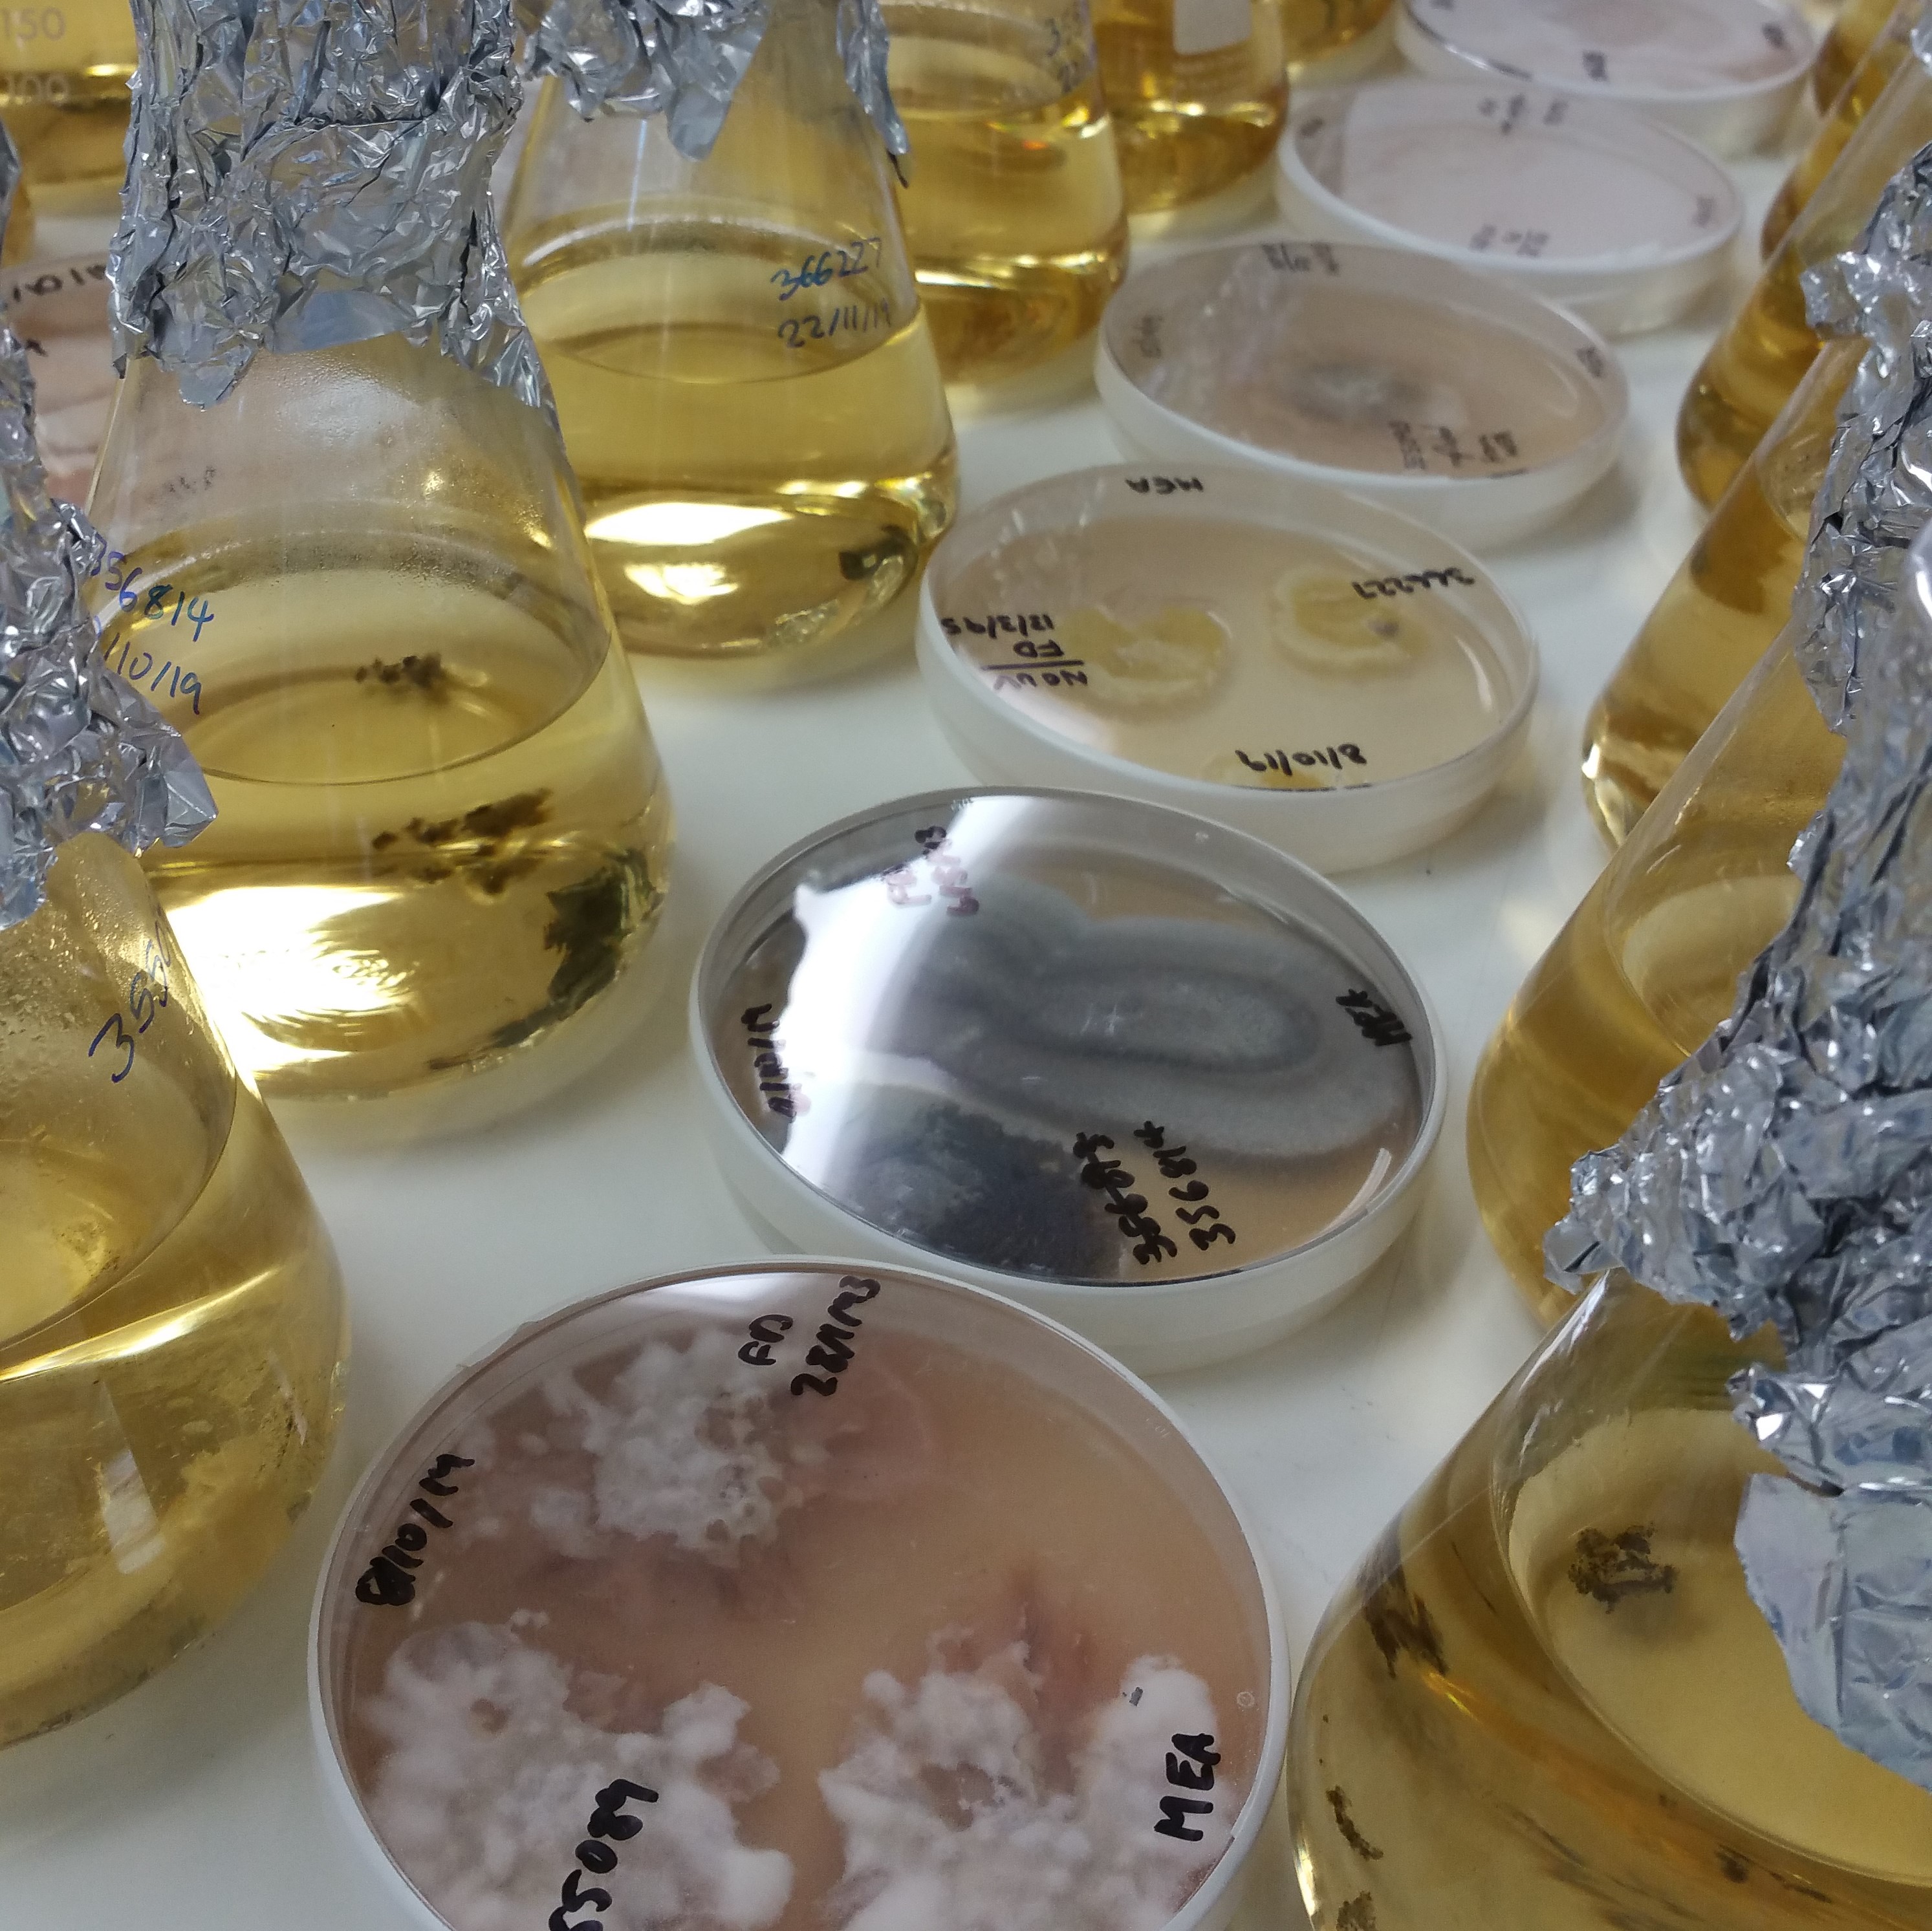 Fungi growing on agar are about to be transferred to conical flasks filled with growth medium